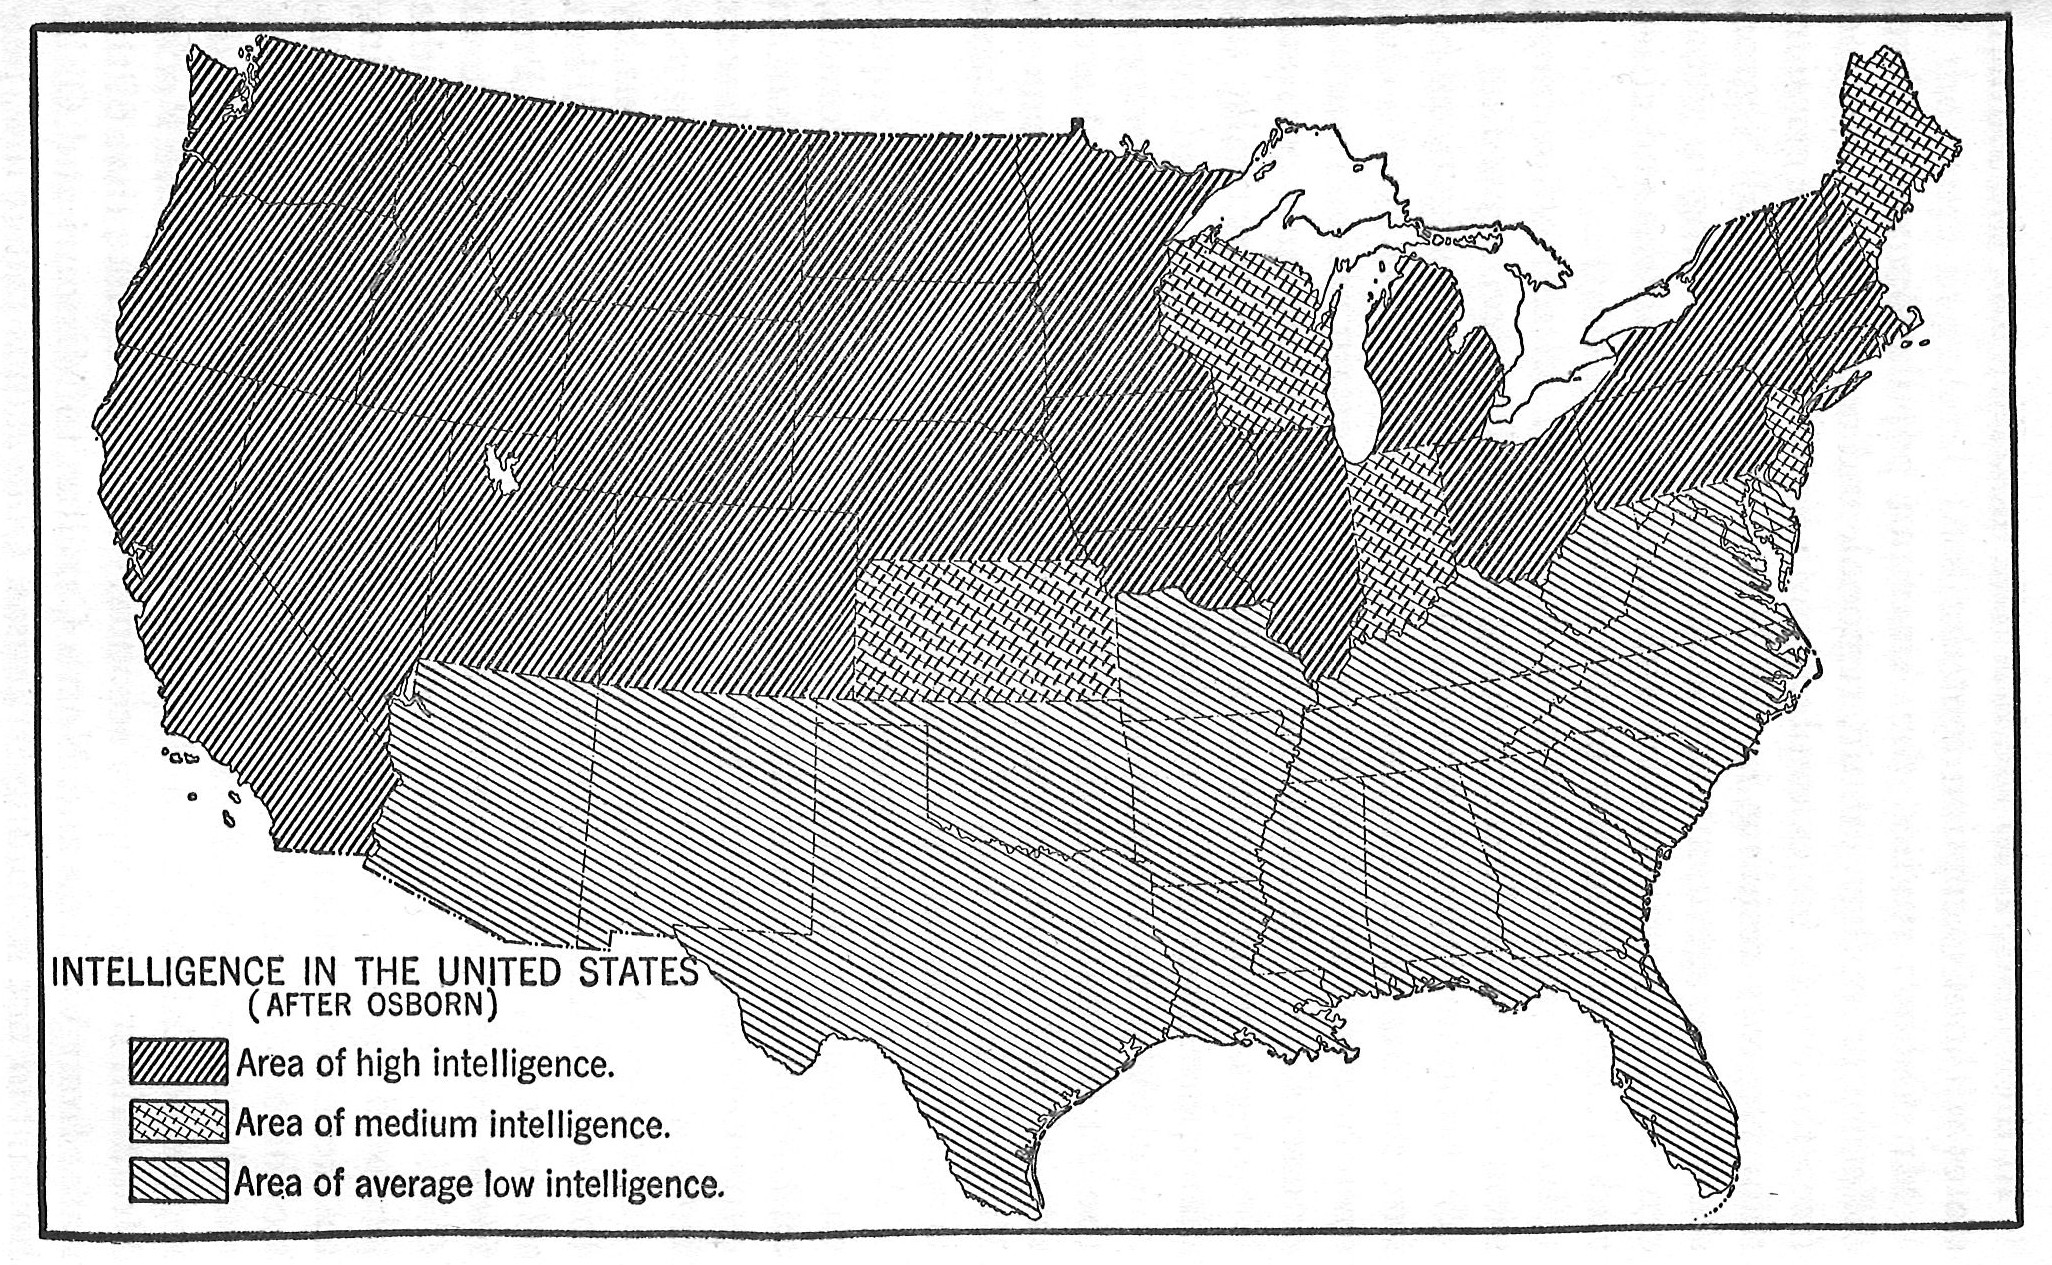 Markham, S.F., Climate and the Energy of Nations, p. 189, Intelligence in the Uniteed States